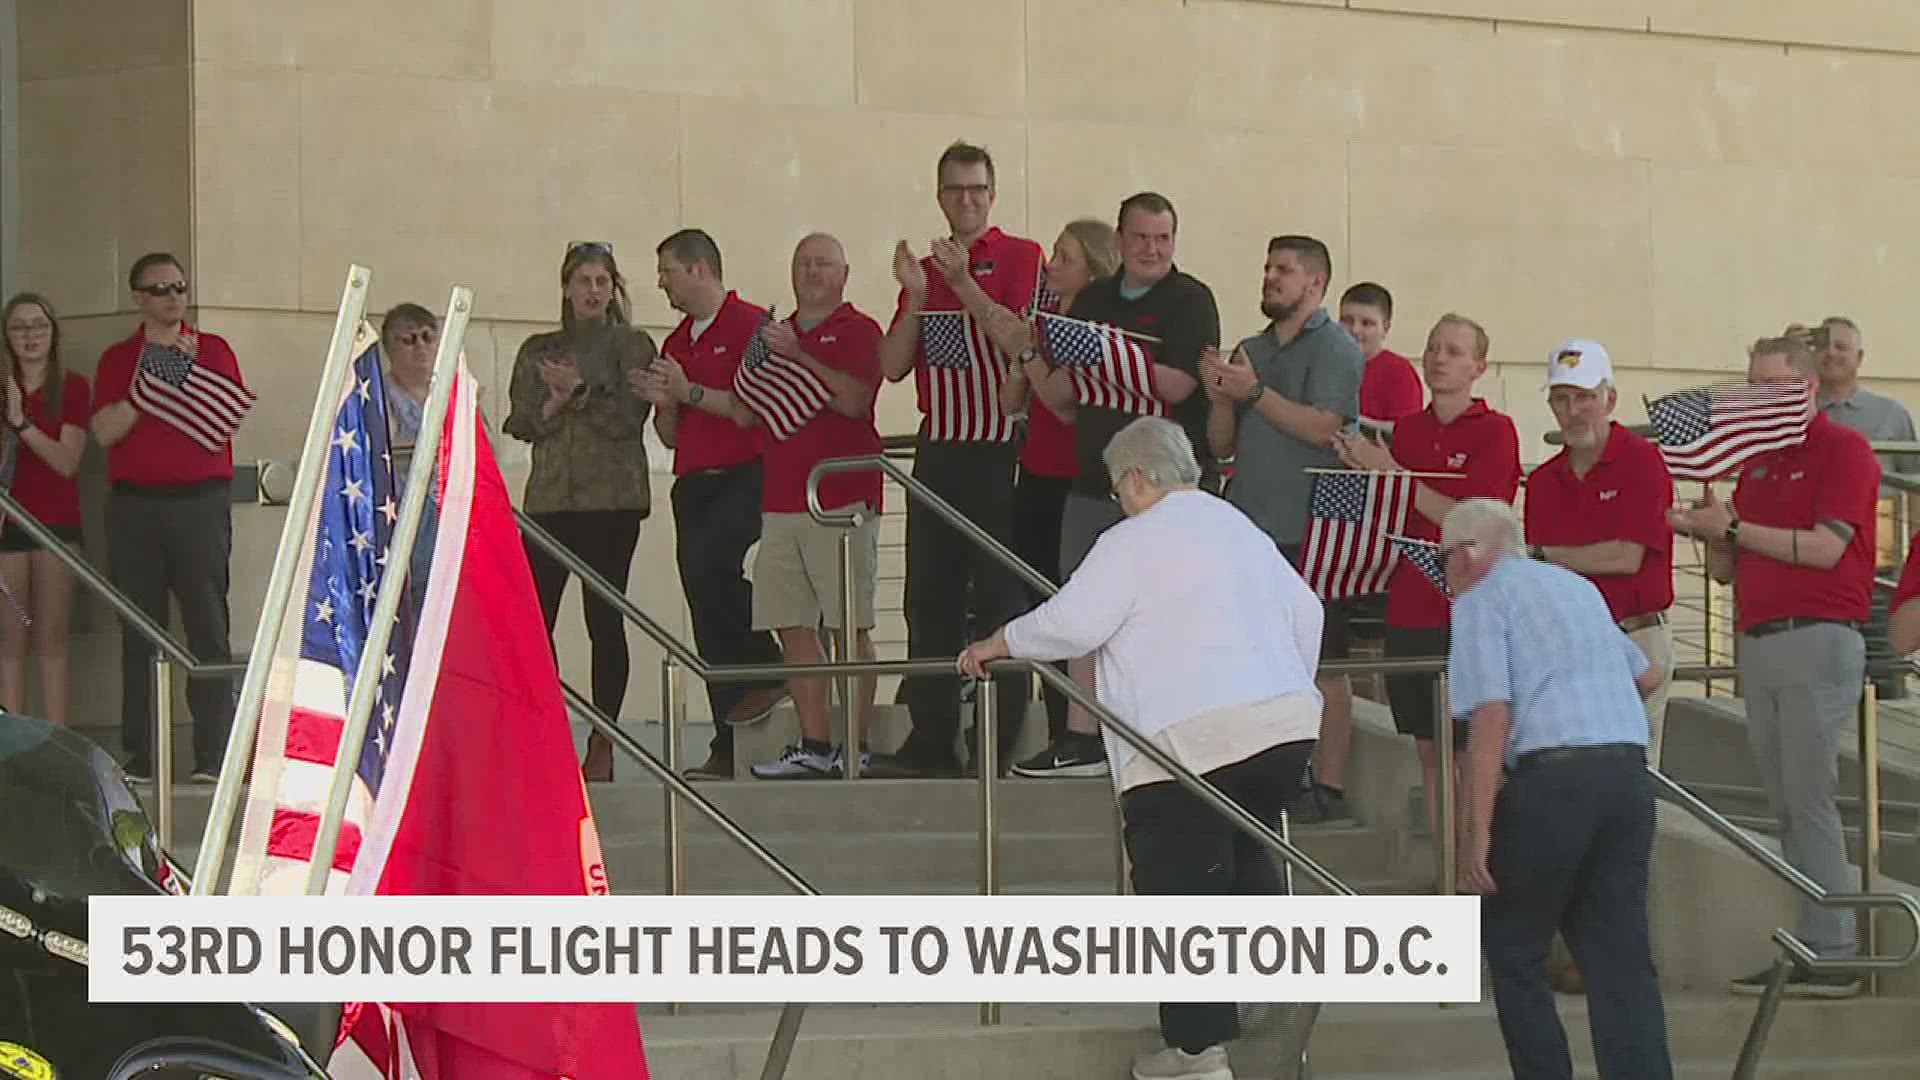 Nearly 100 veterans are heading Tuesday to Washington D.C. for the 53rd Honor Flight.